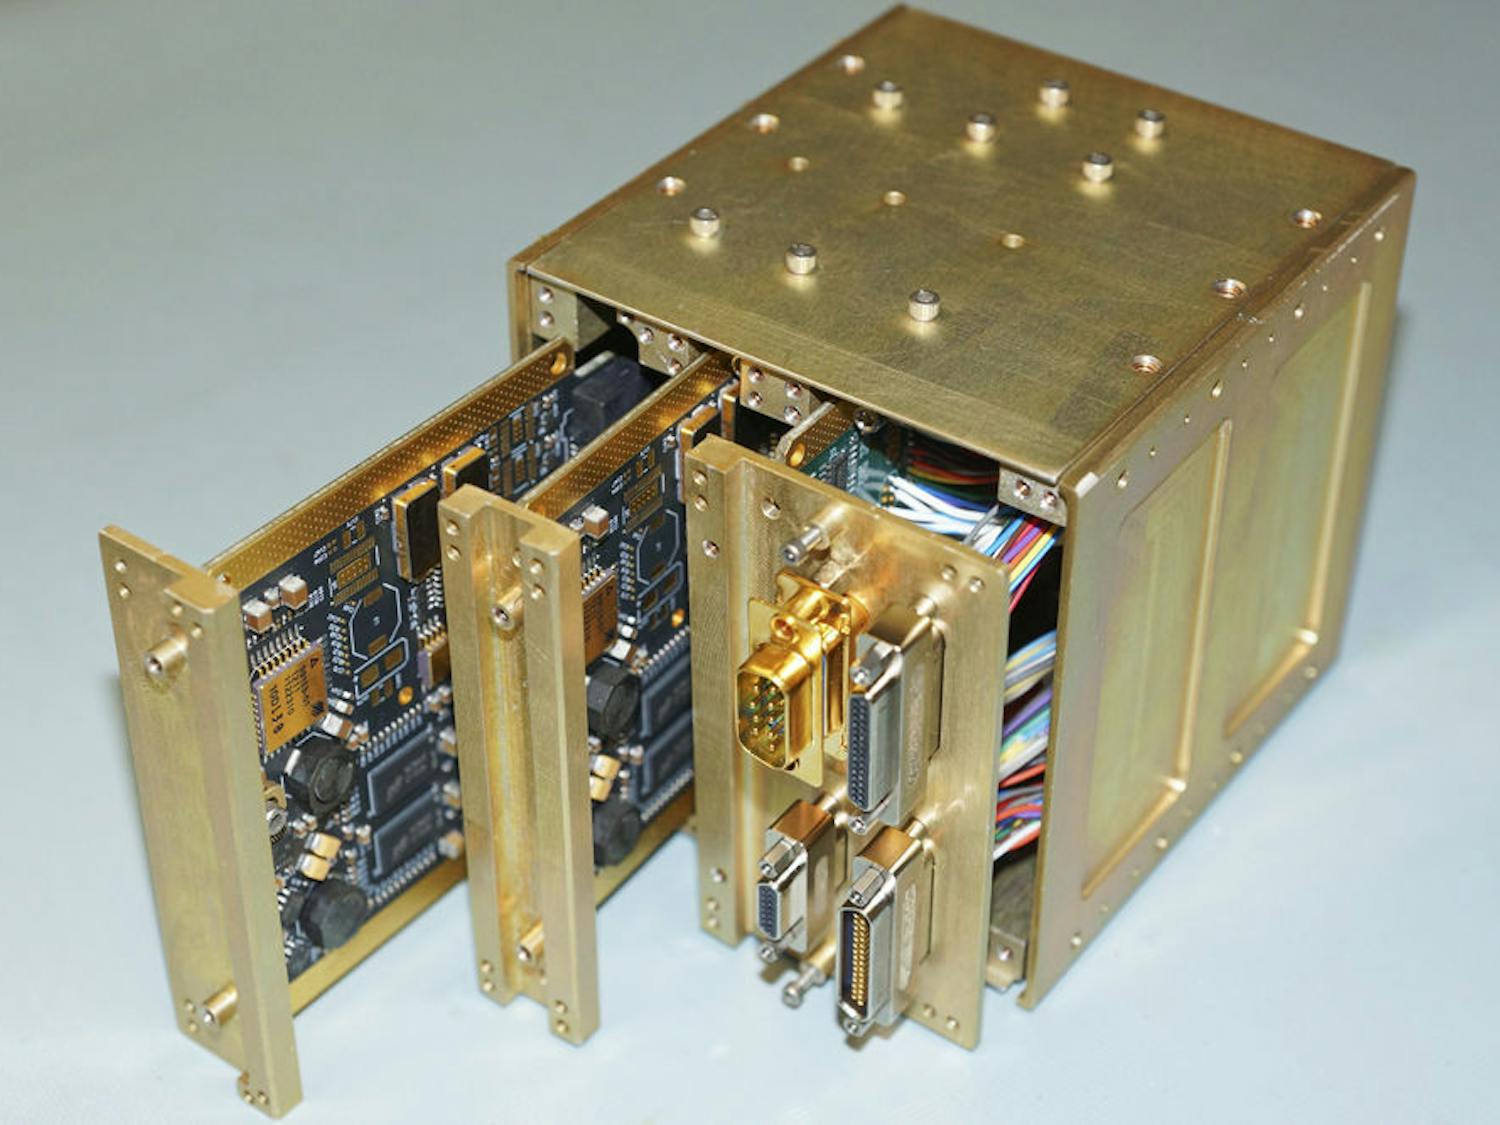 Pictured is the CSP-ISEM, one of the computer systems that will go up on a NASA mission to the International Space Station.